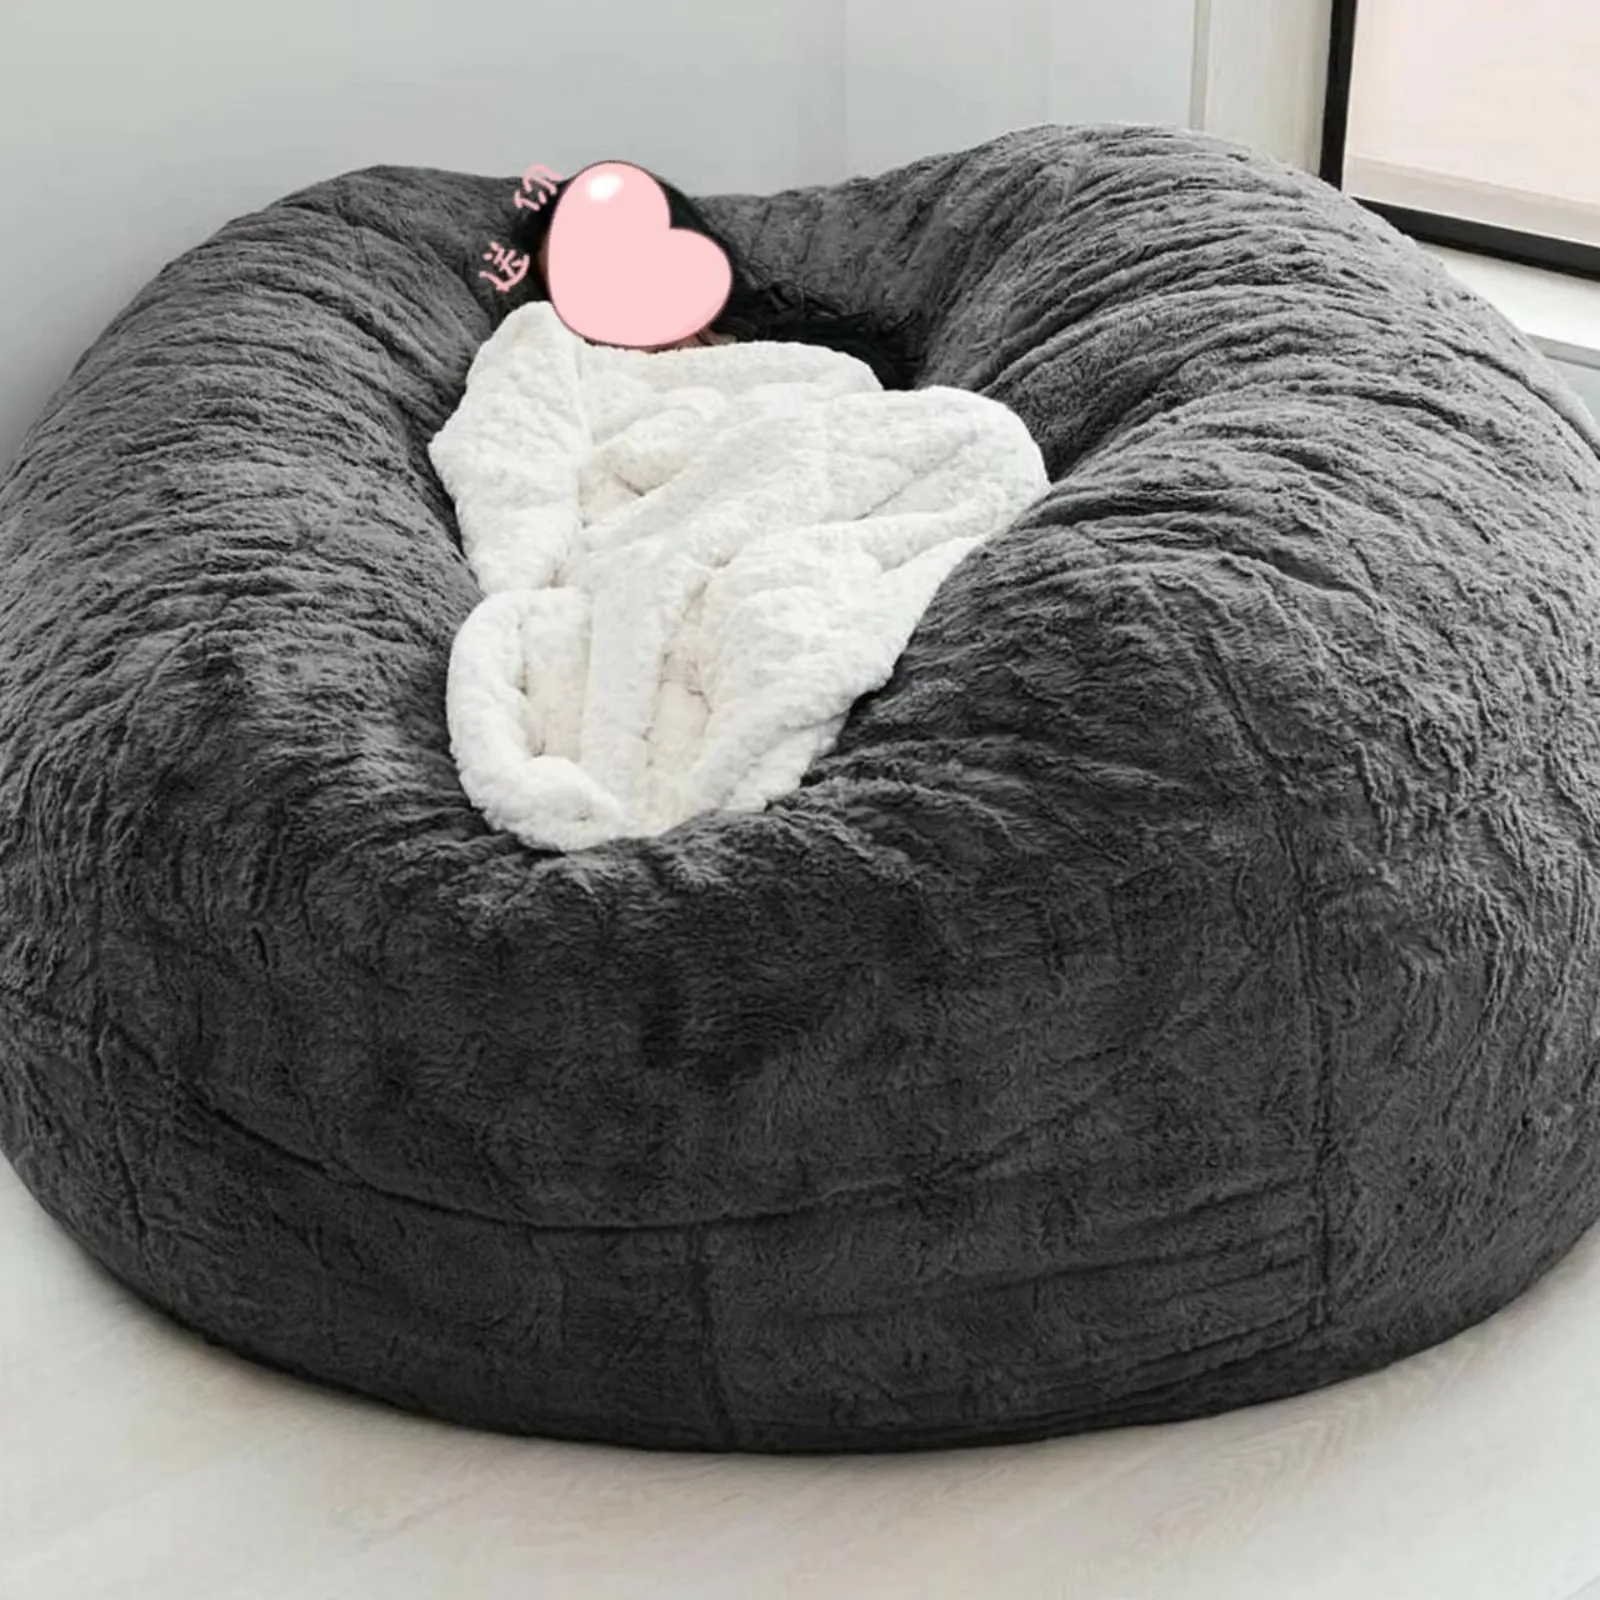 Free Sample Hot Sales 7ft Round Unstuffed Faux Fur Plush Soft Giant Big Large lazy Sofa Bed Bean Bag Sofa Cover for Living Room